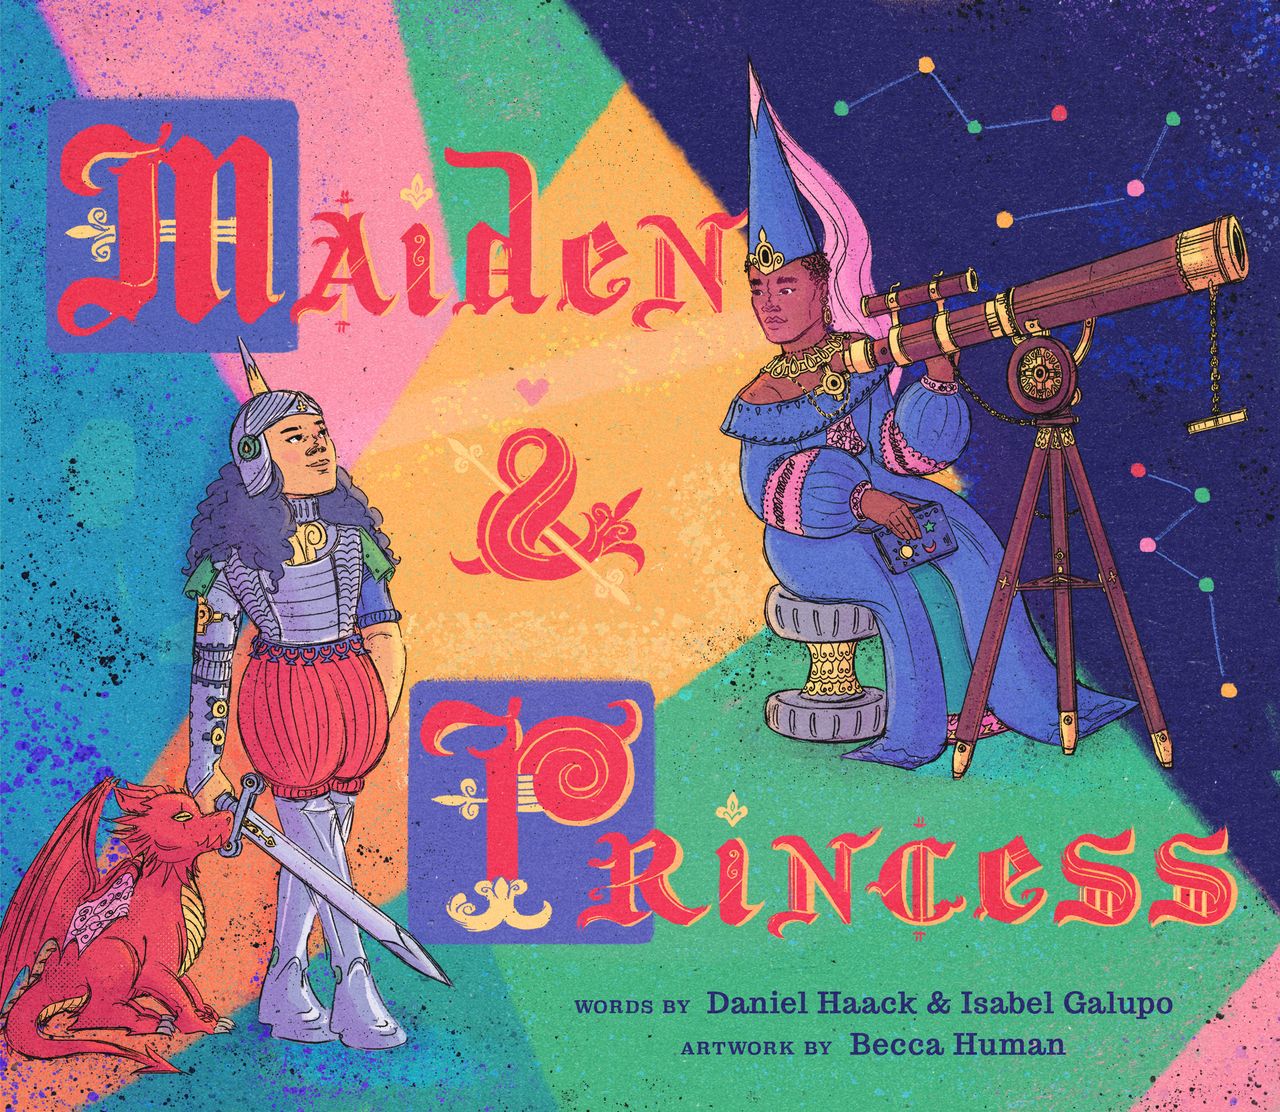 Daniel Haack and Isabel Galupo's Maiden & Princess is due out April 2019. 